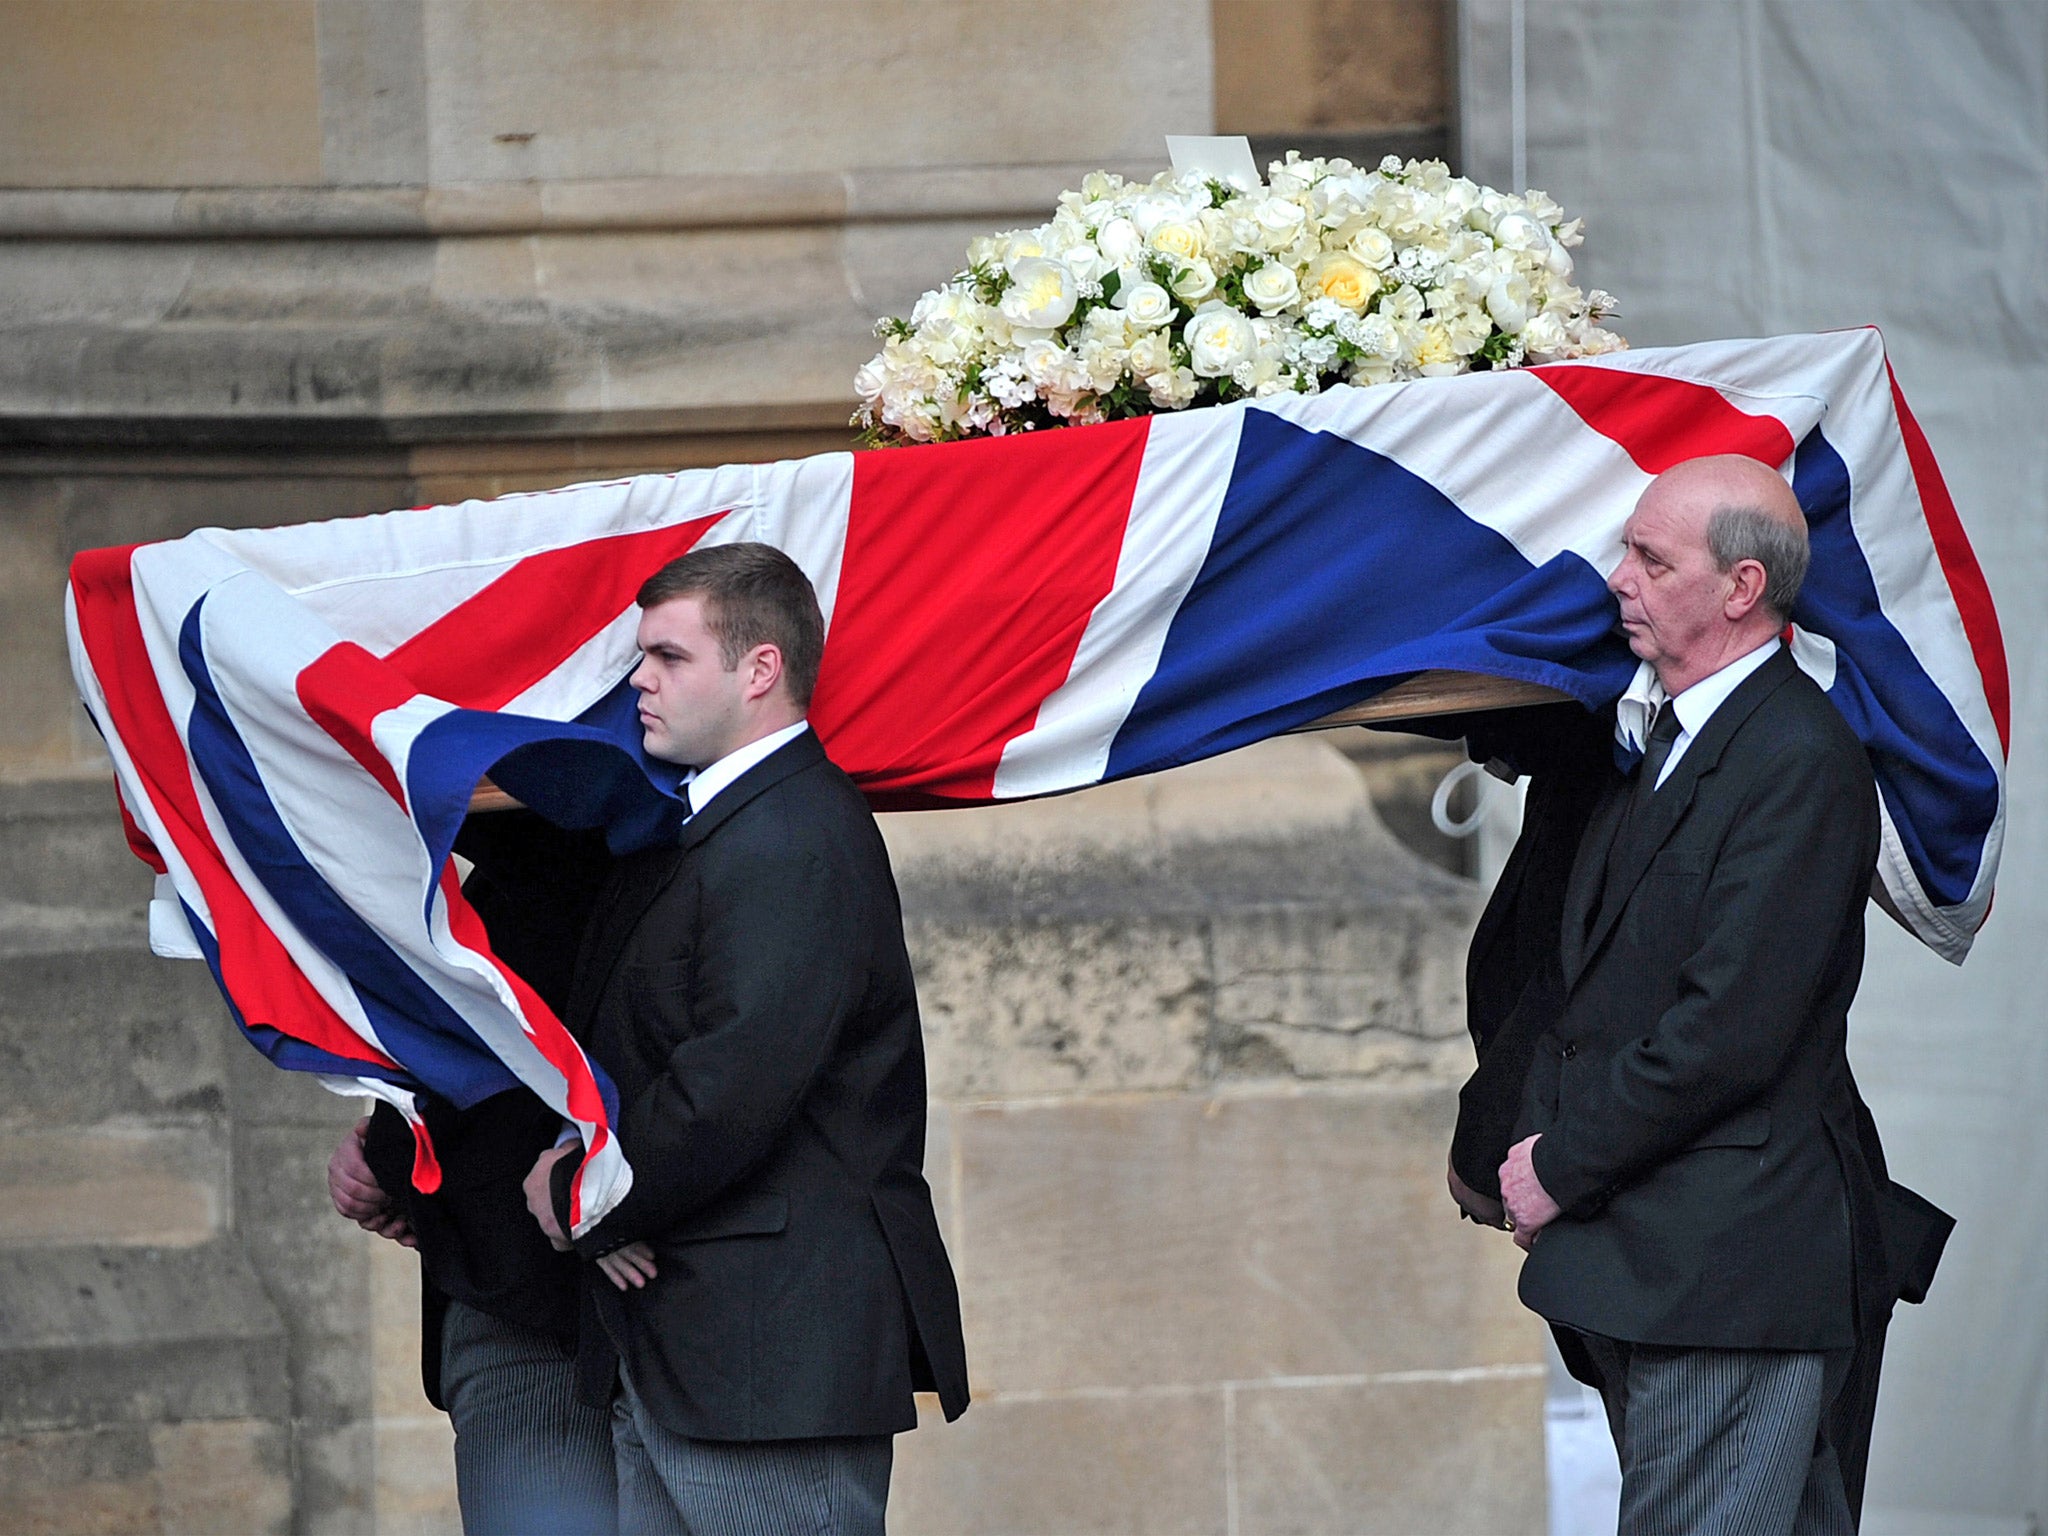 Pallbearers carry the coffin of Margaret Thatcher as it arrives to be laid at the Crypt Chapel of St Mary Undercoft in the Houses of Parliament